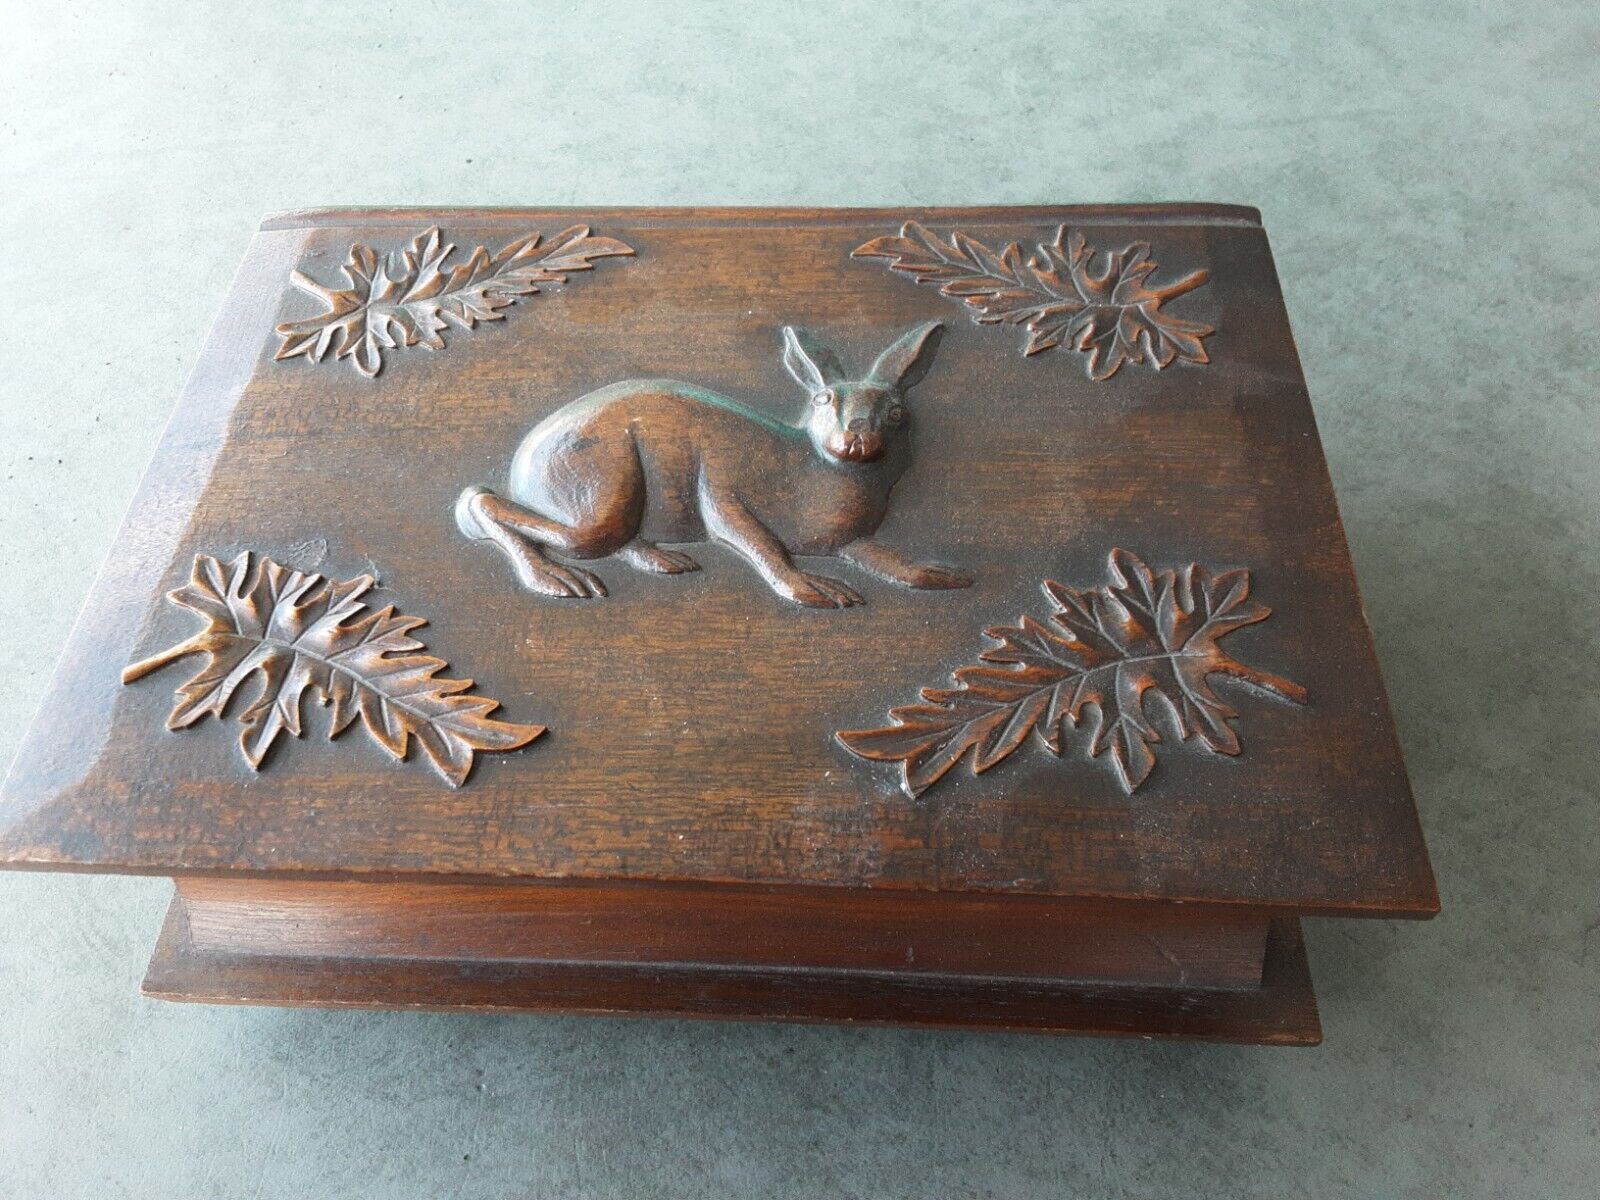 Antique Black Forest Fitted Sewing Box. Rabbit & Oak Leaves, Book Shaped